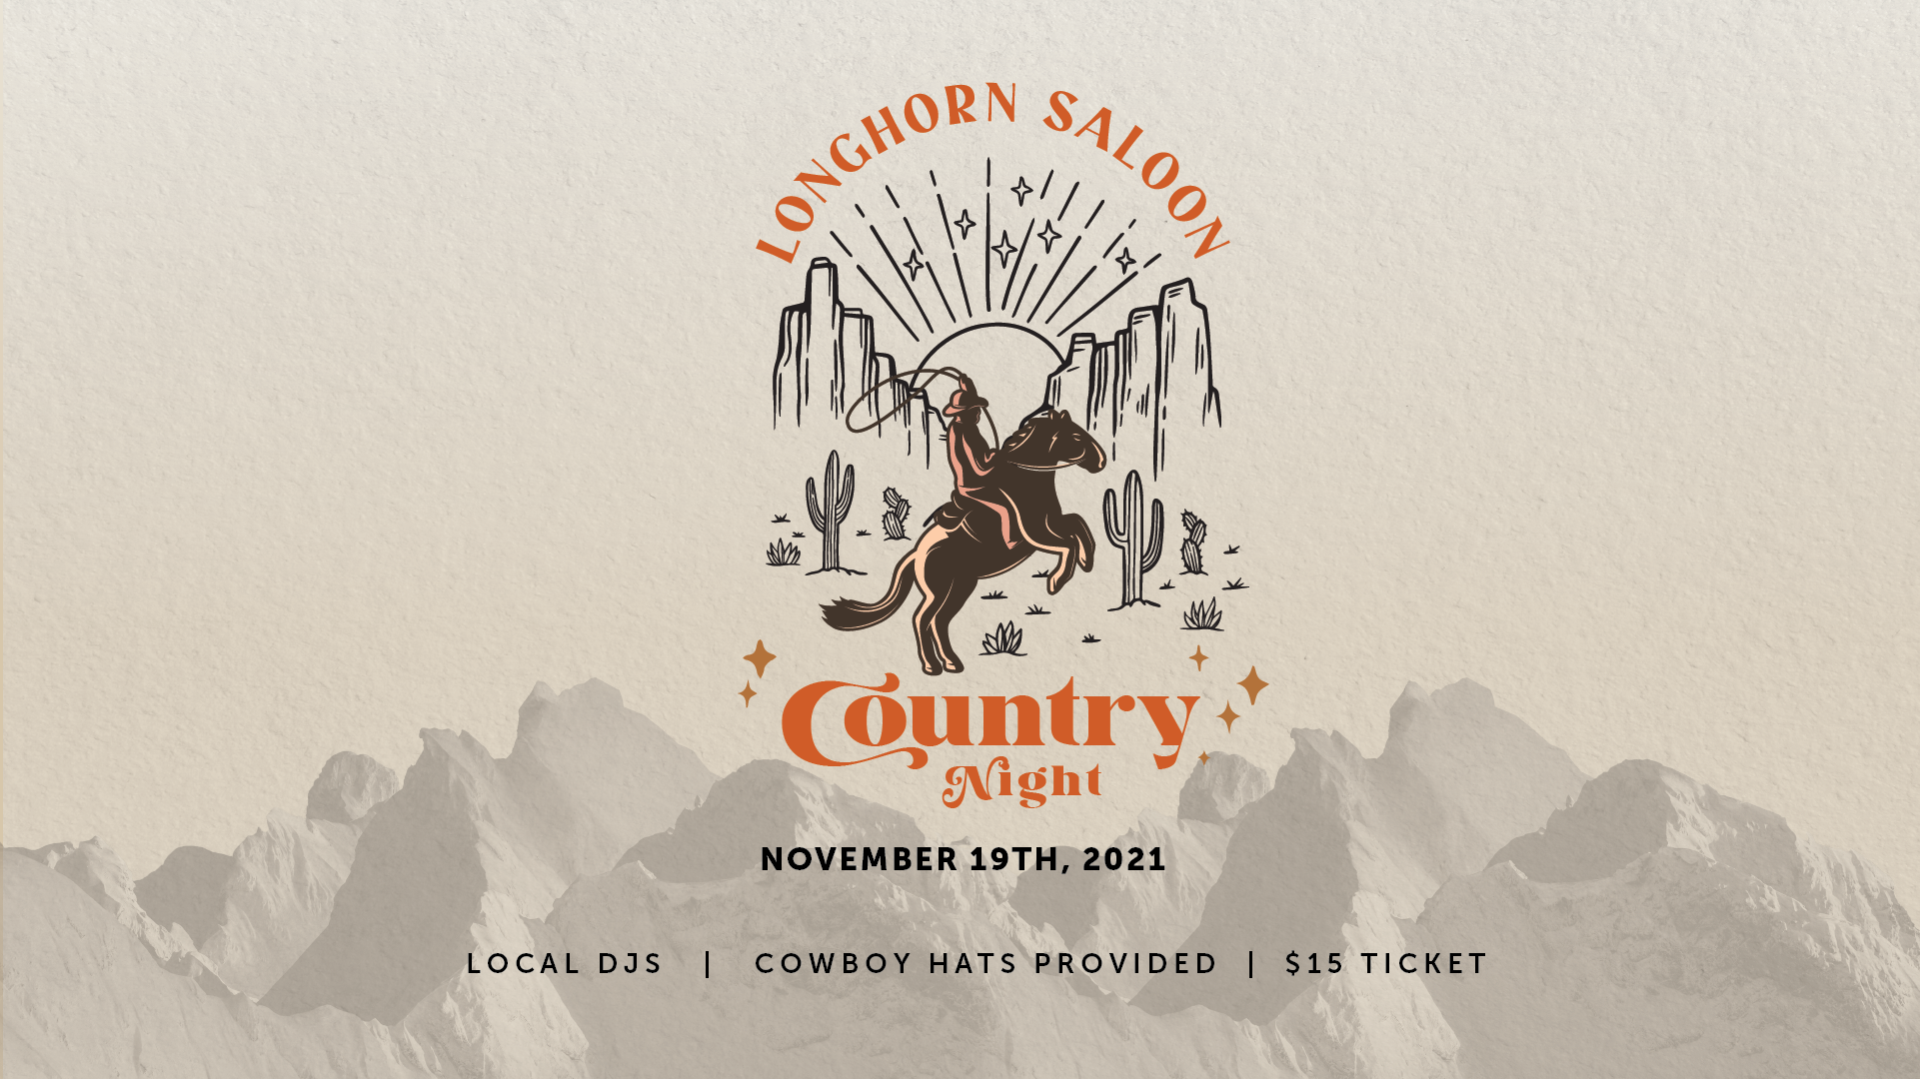 Longhorn Saloon Presents - Country Night